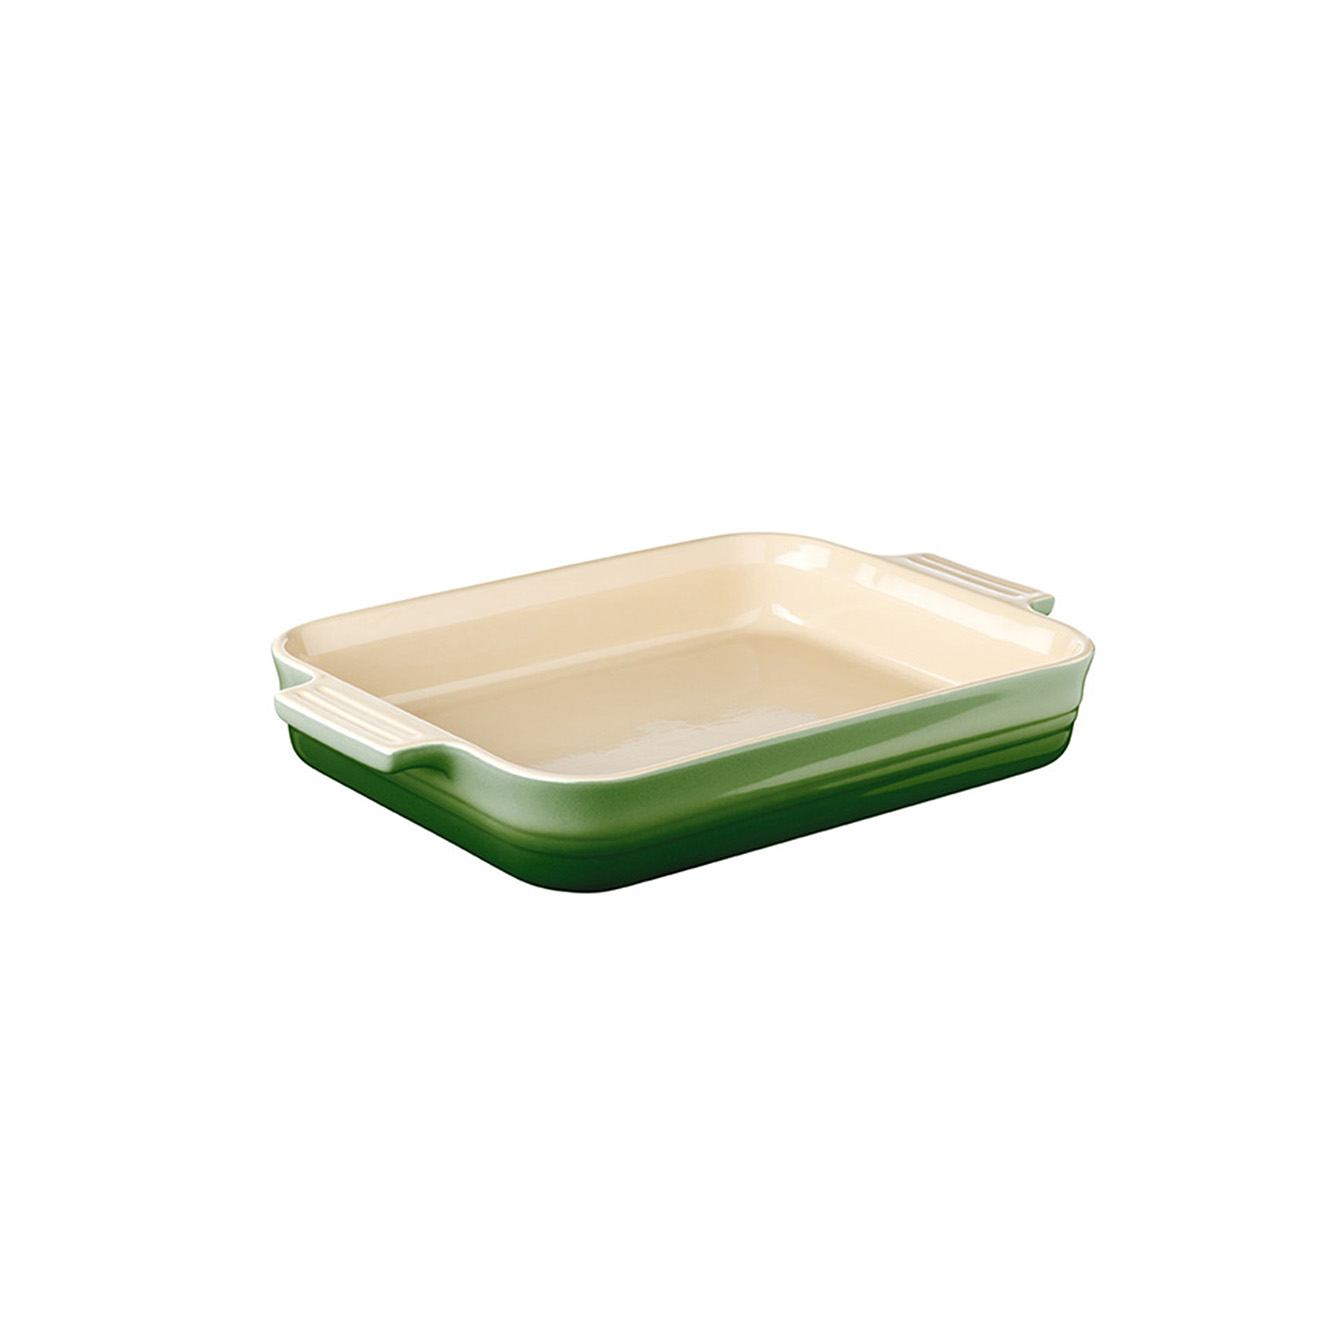 Classic stoneware casserole dish, 18cm (also available in 23 and 32cm) Bamboo color | Outlet price € 27,30 | RRP € 39